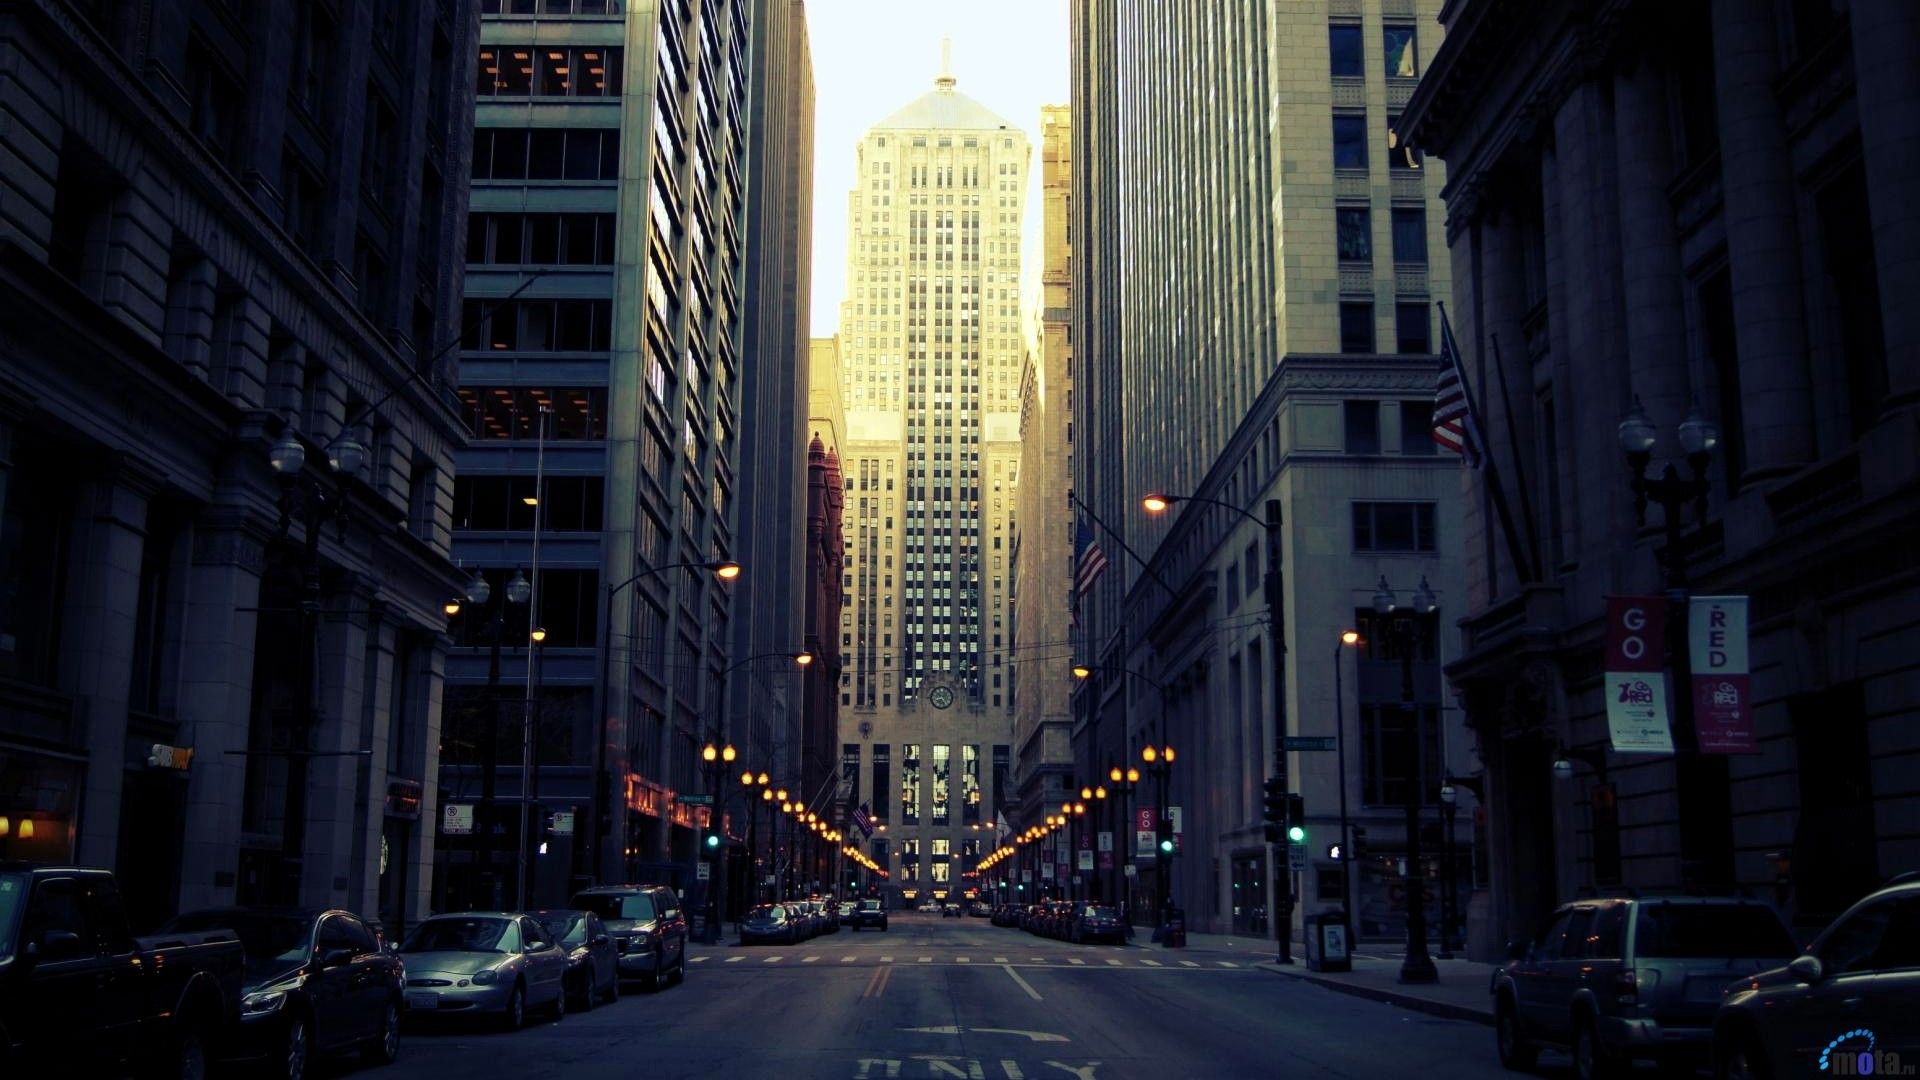 Cityscape wallpaper with a beautiful street view - Chicago